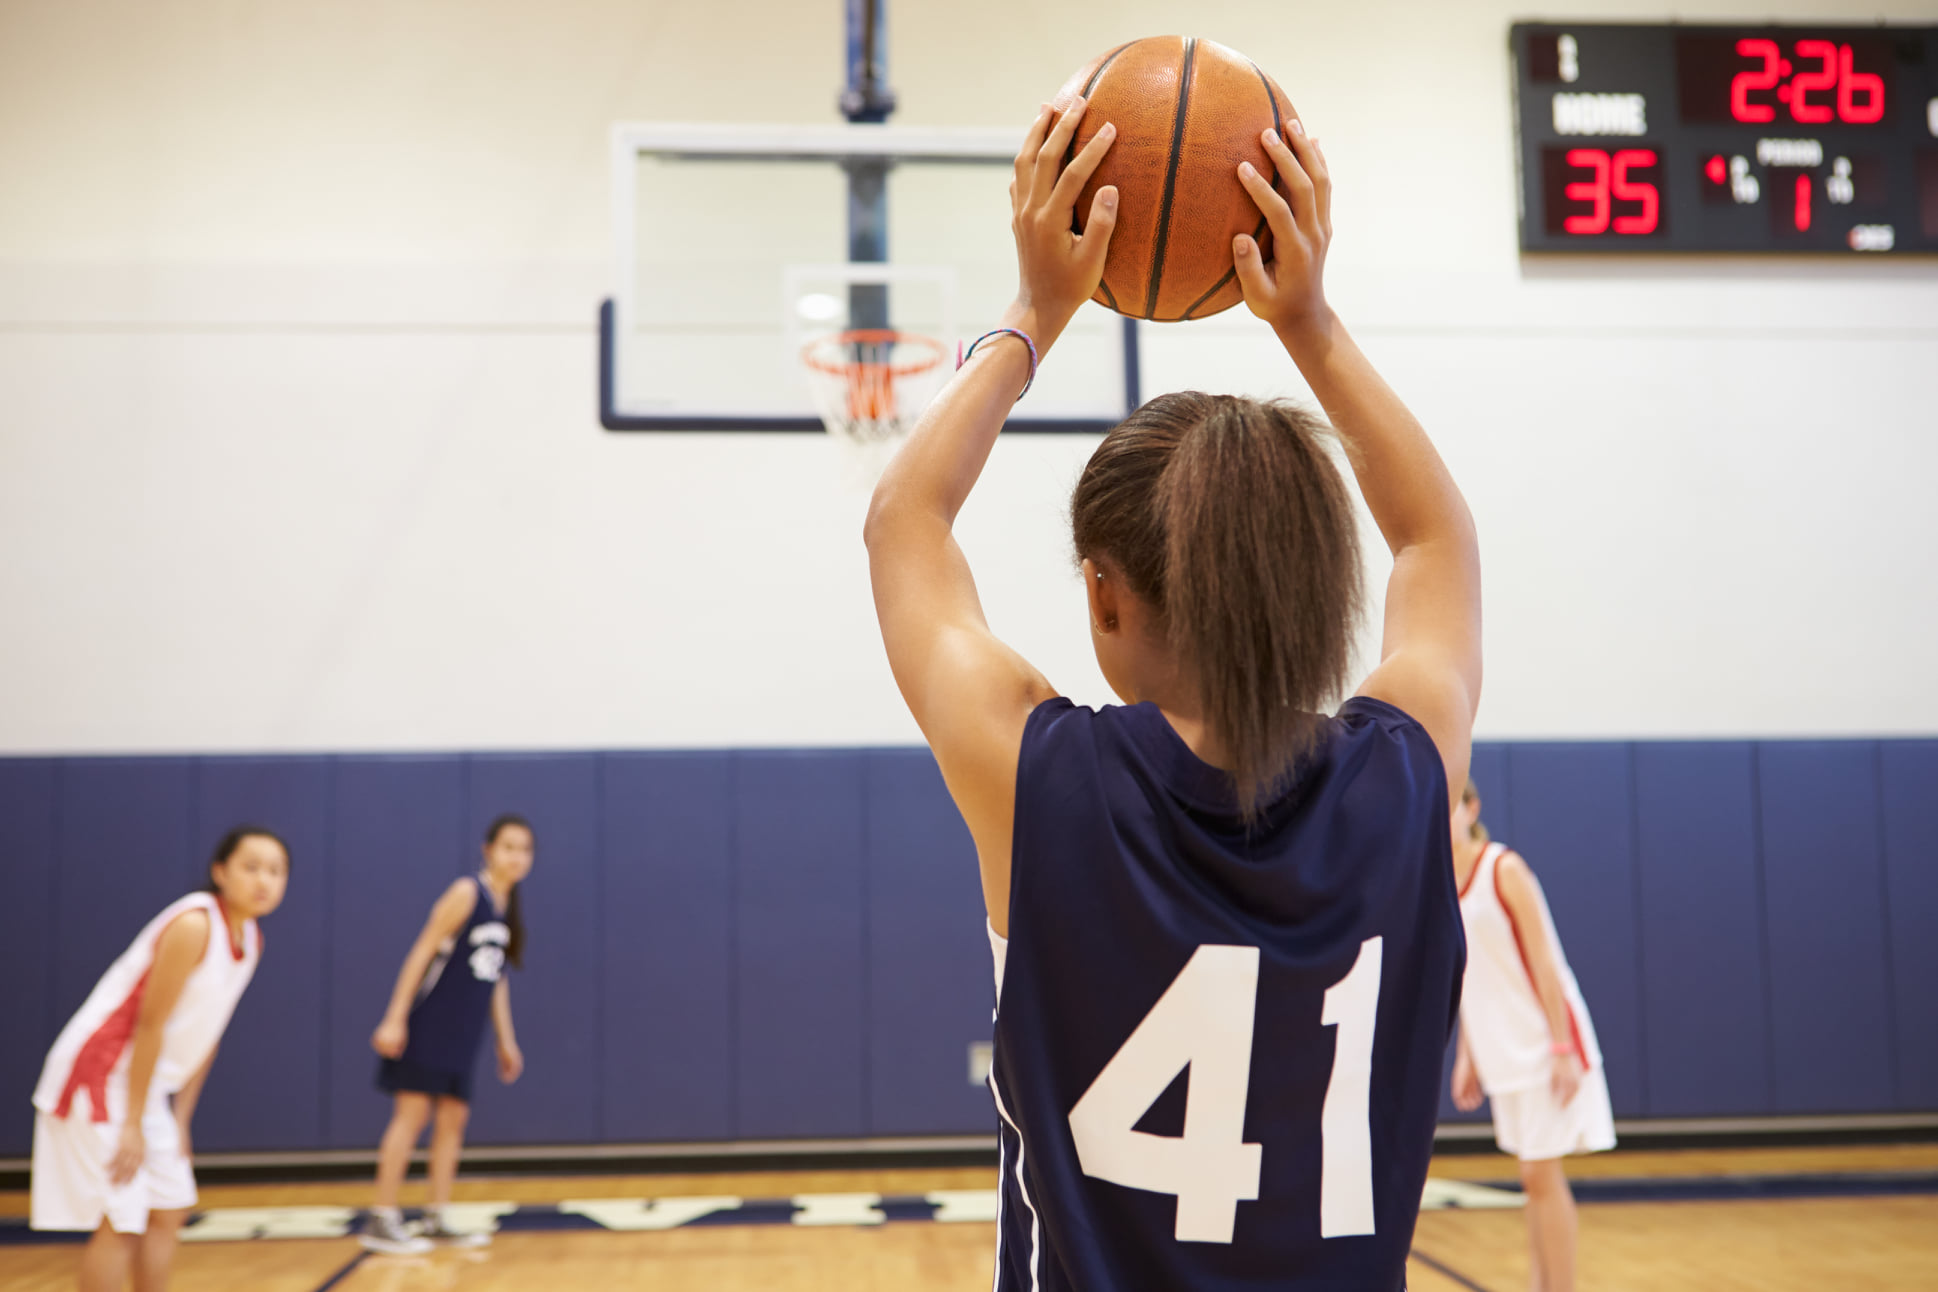 Growth Mindset in Youth Sports